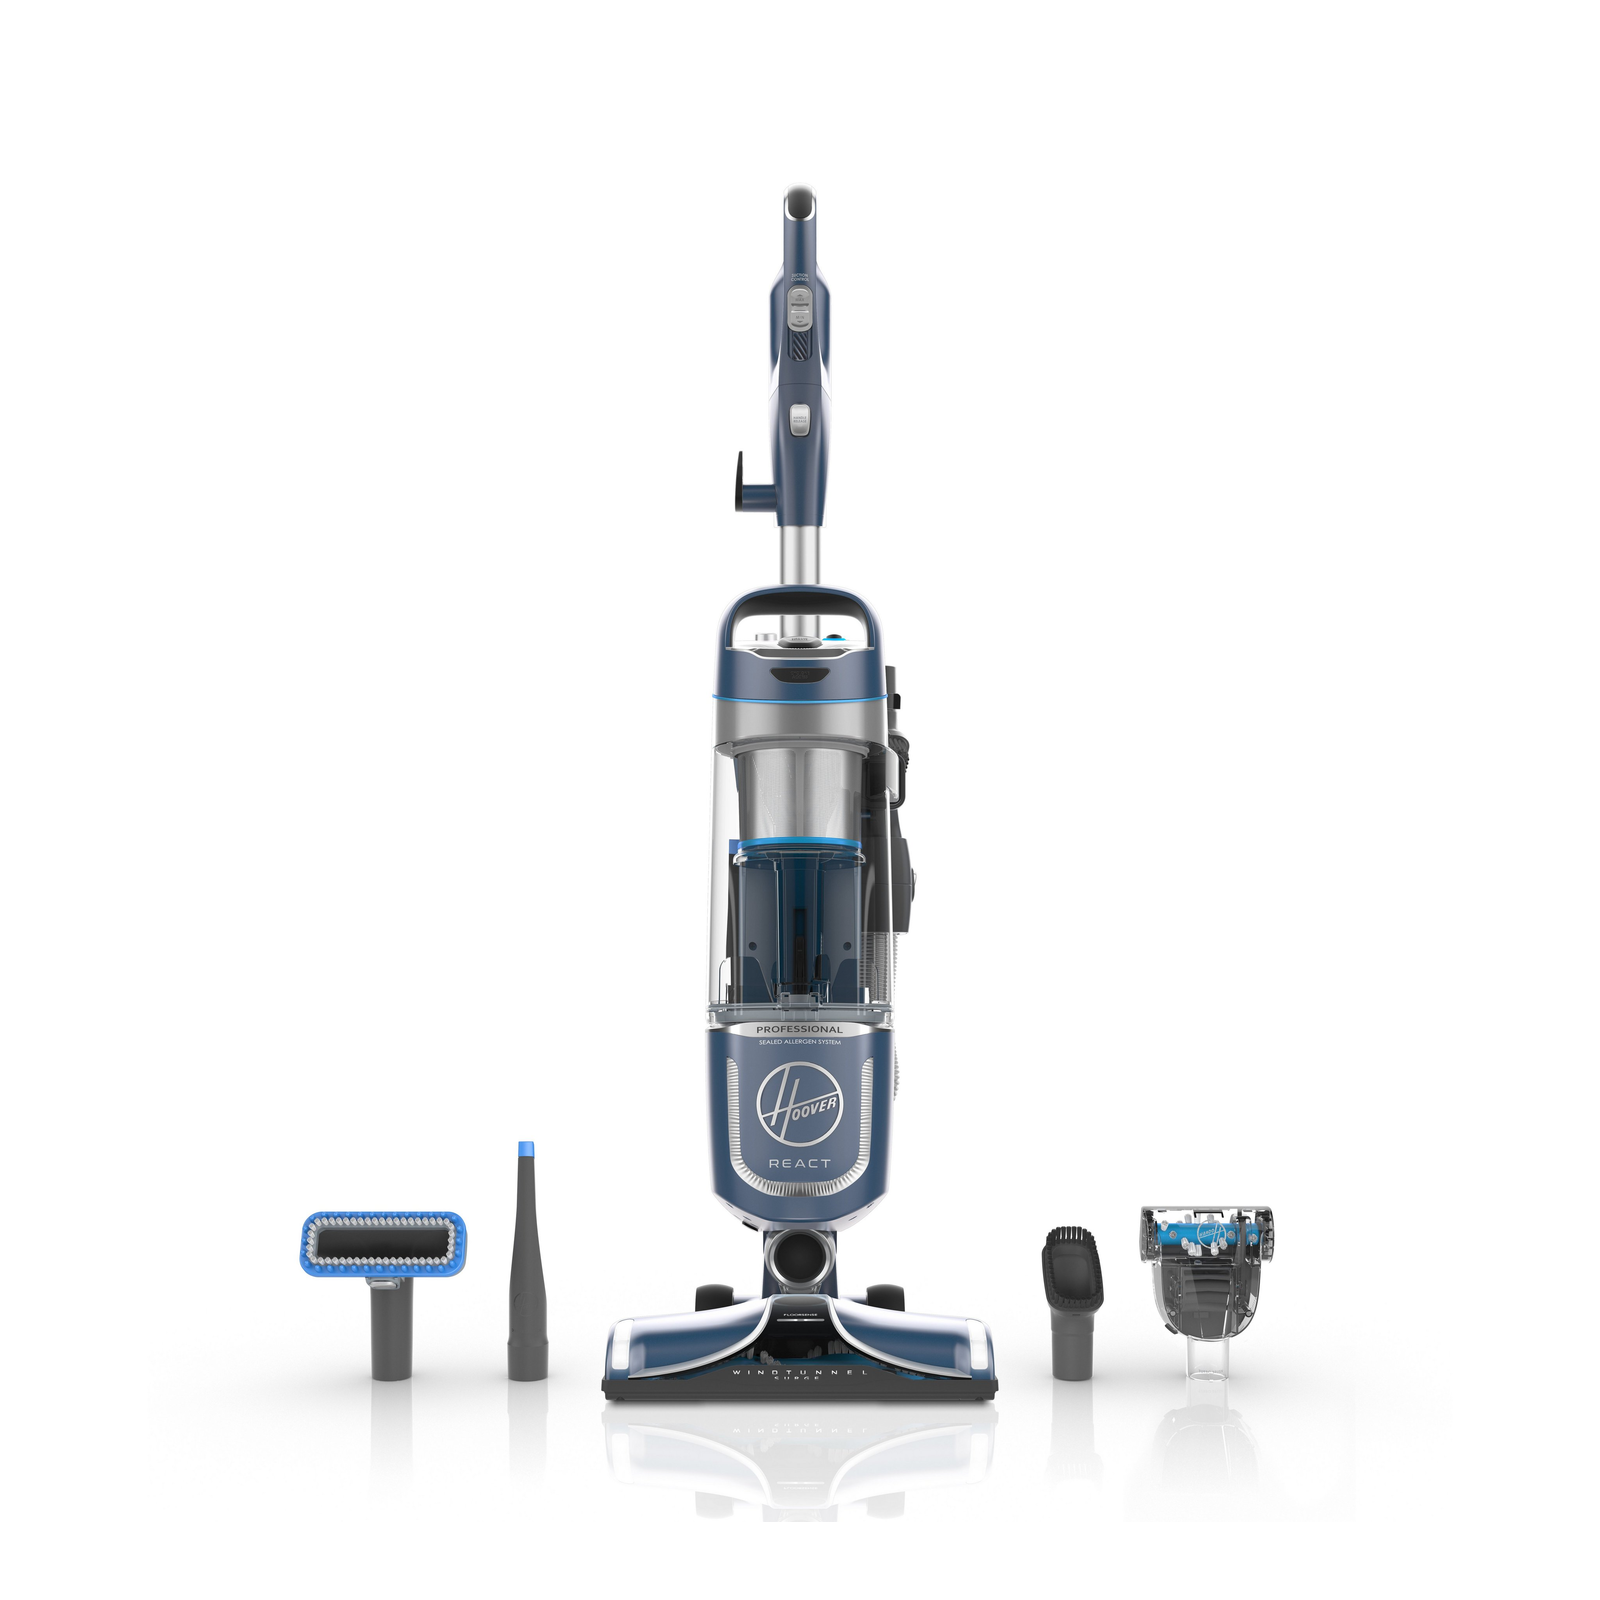 Hoover REACT Professional Pet Plus Bagless Upright - UH73220 NEW